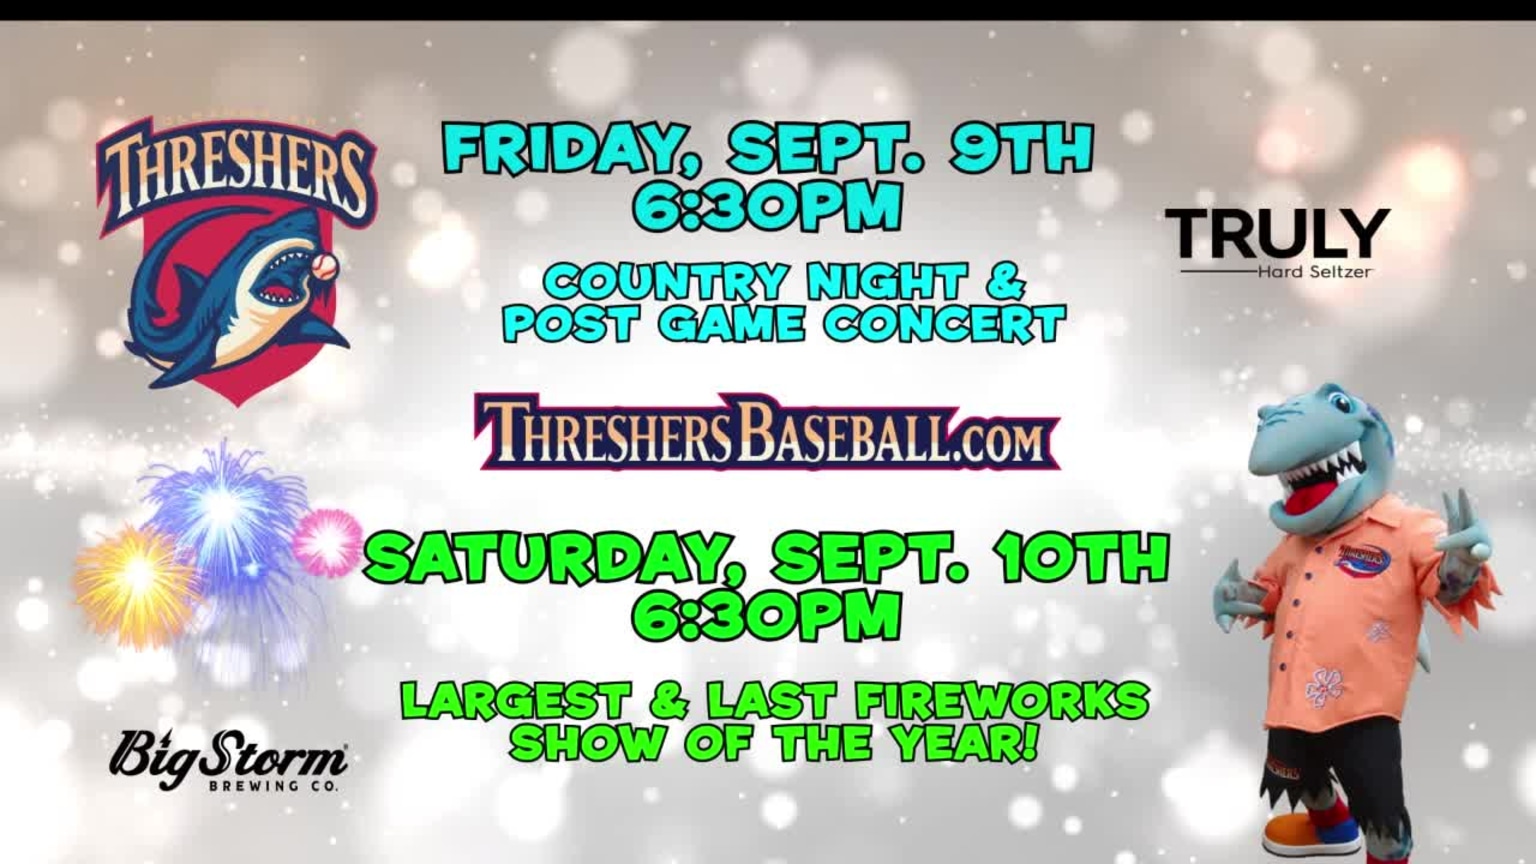 Postgame Concert and Fireworks on Sep. 9 & 10 09/01/2022 Threshers